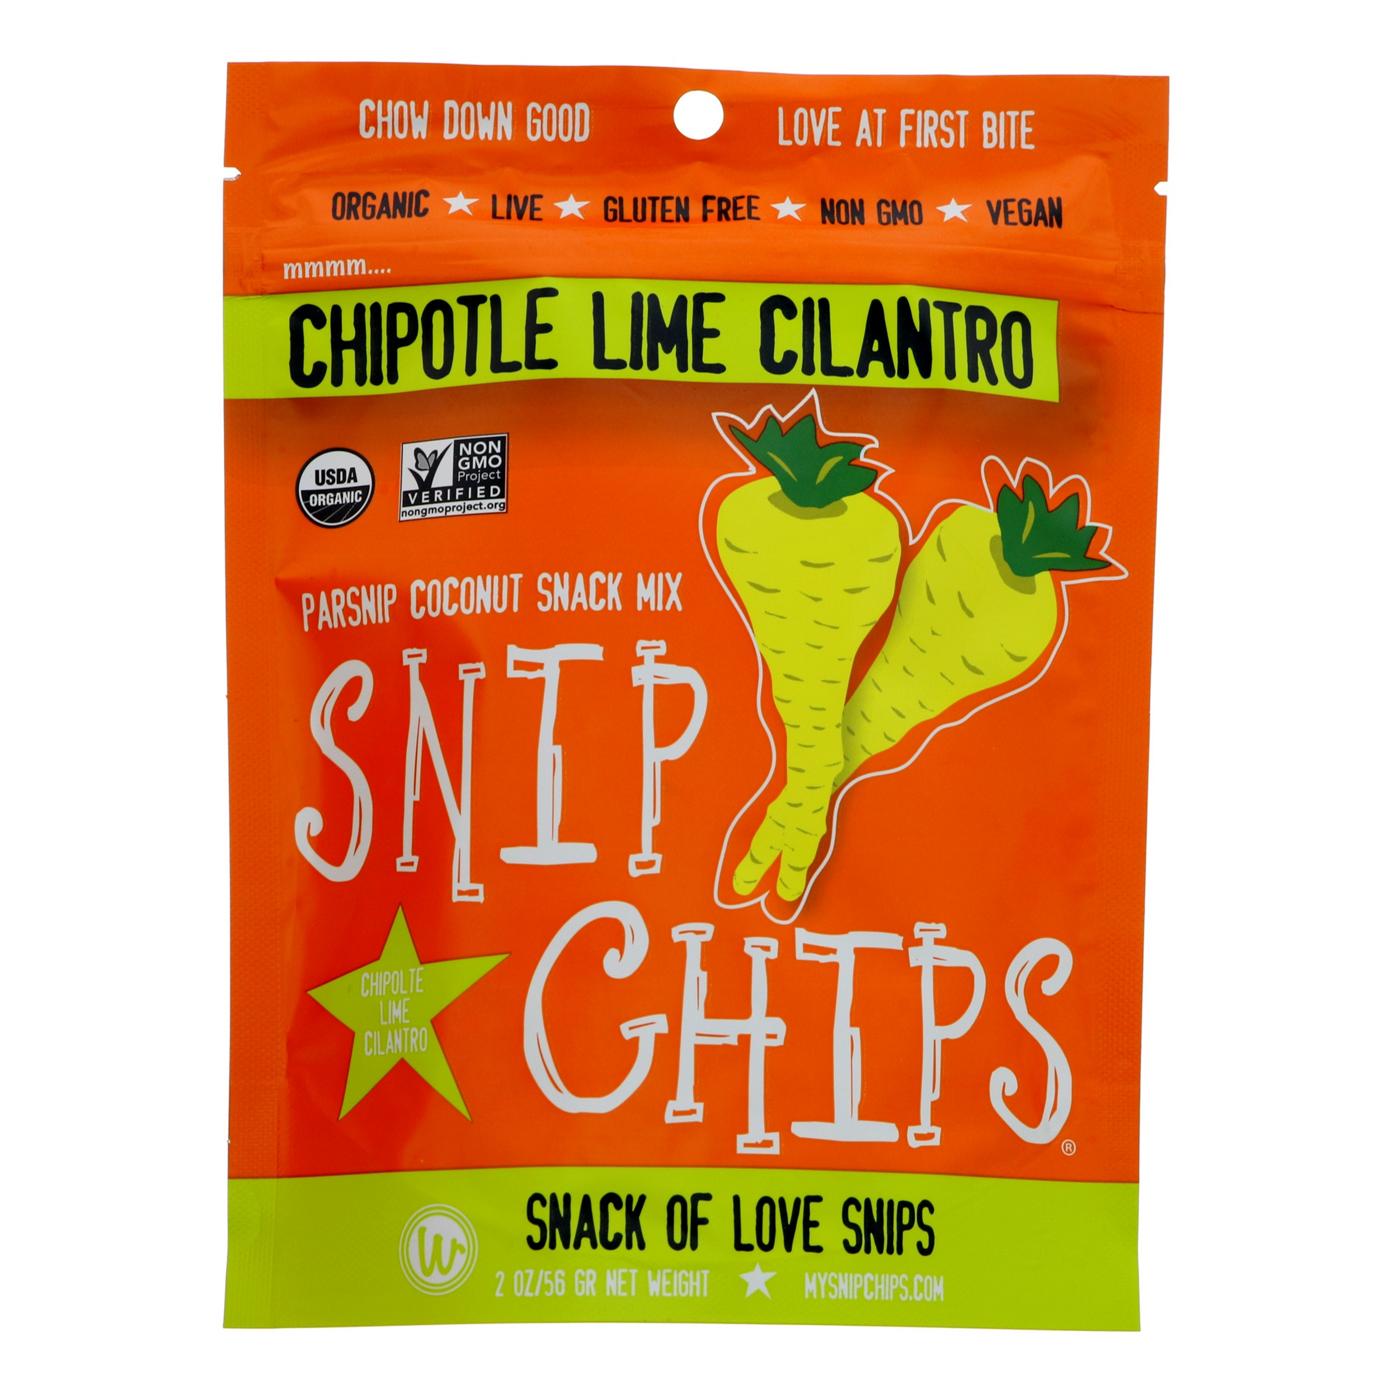 Snip Chips Wonderfully Raw Chipotle Lime Cilantro; image 1 of 2